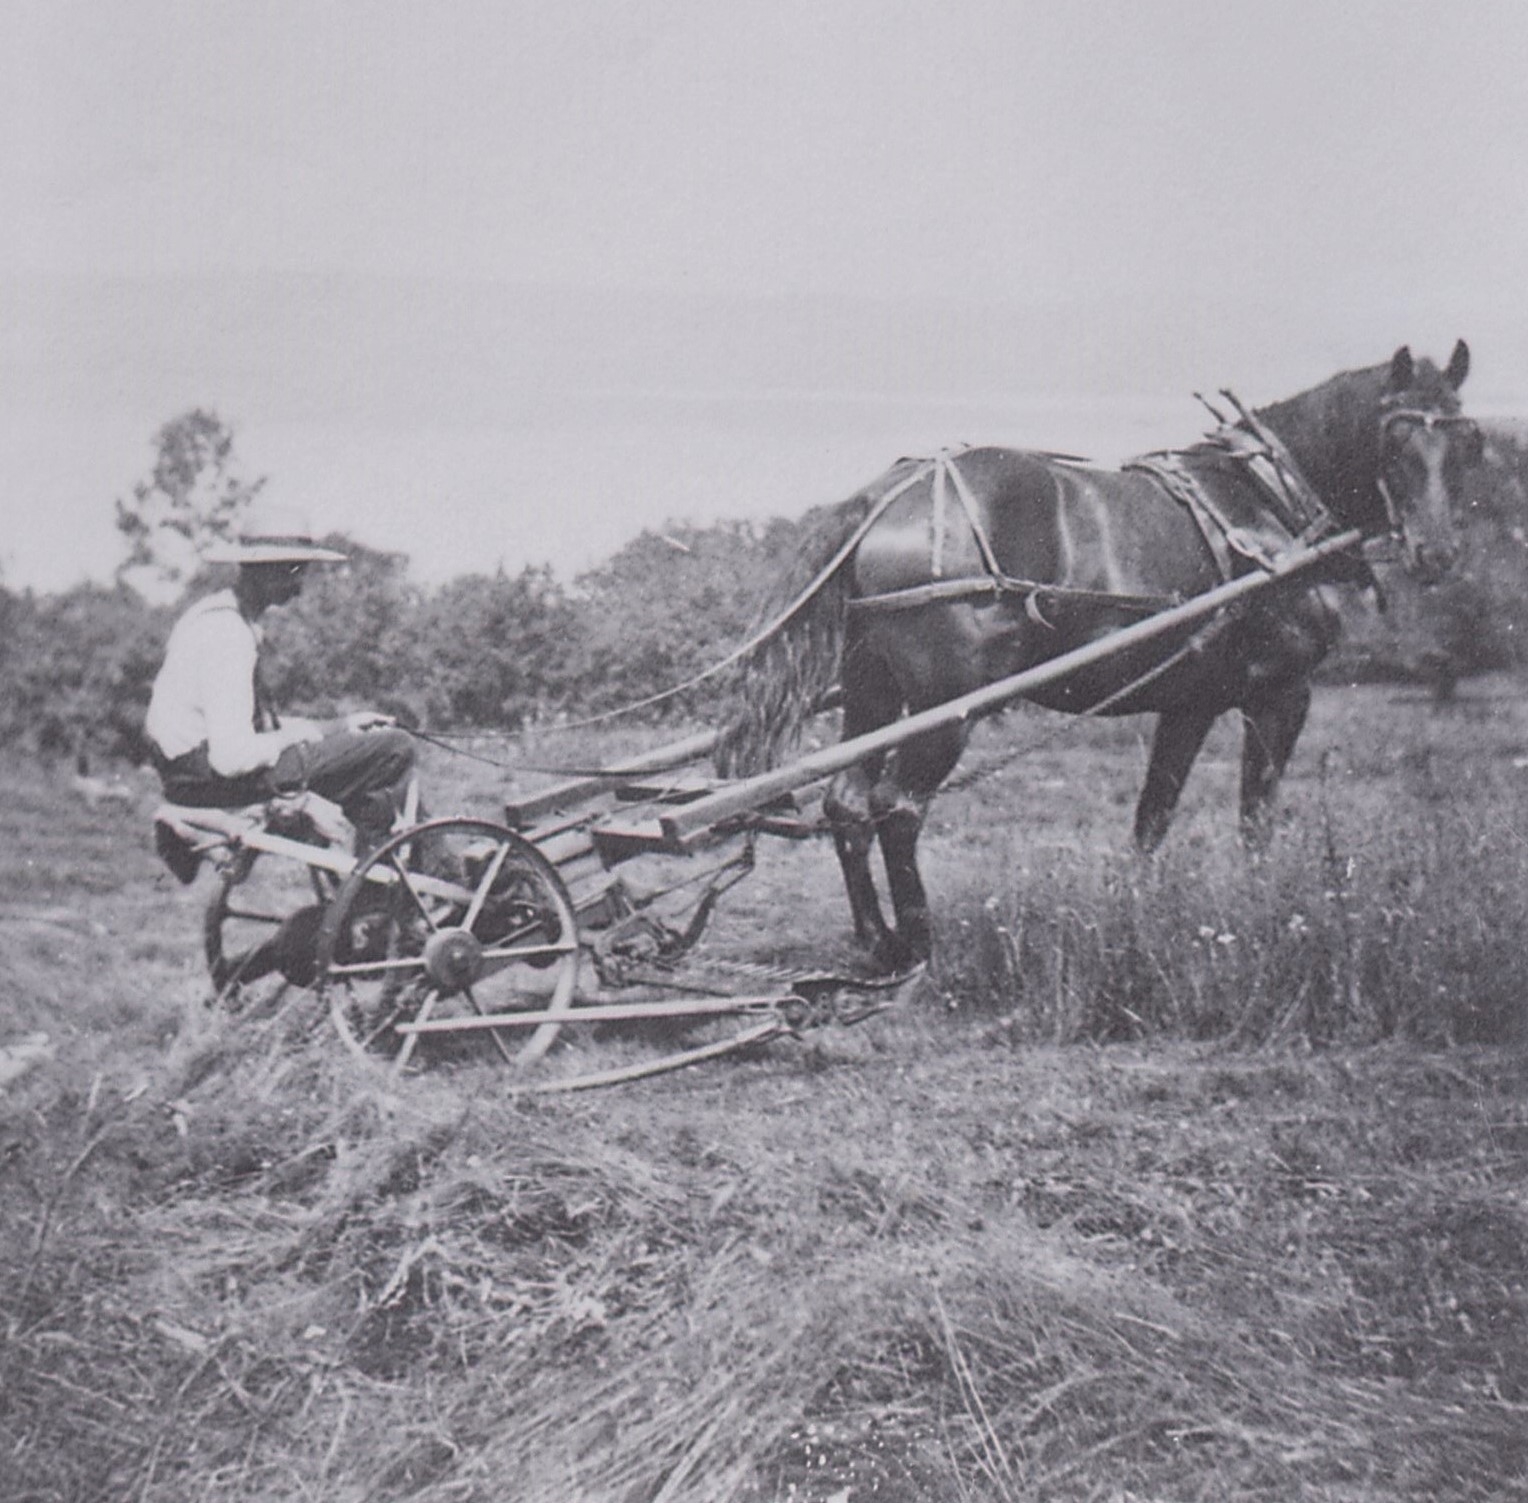 Right side view of man with hat sitting on horse drawn hay cutter.